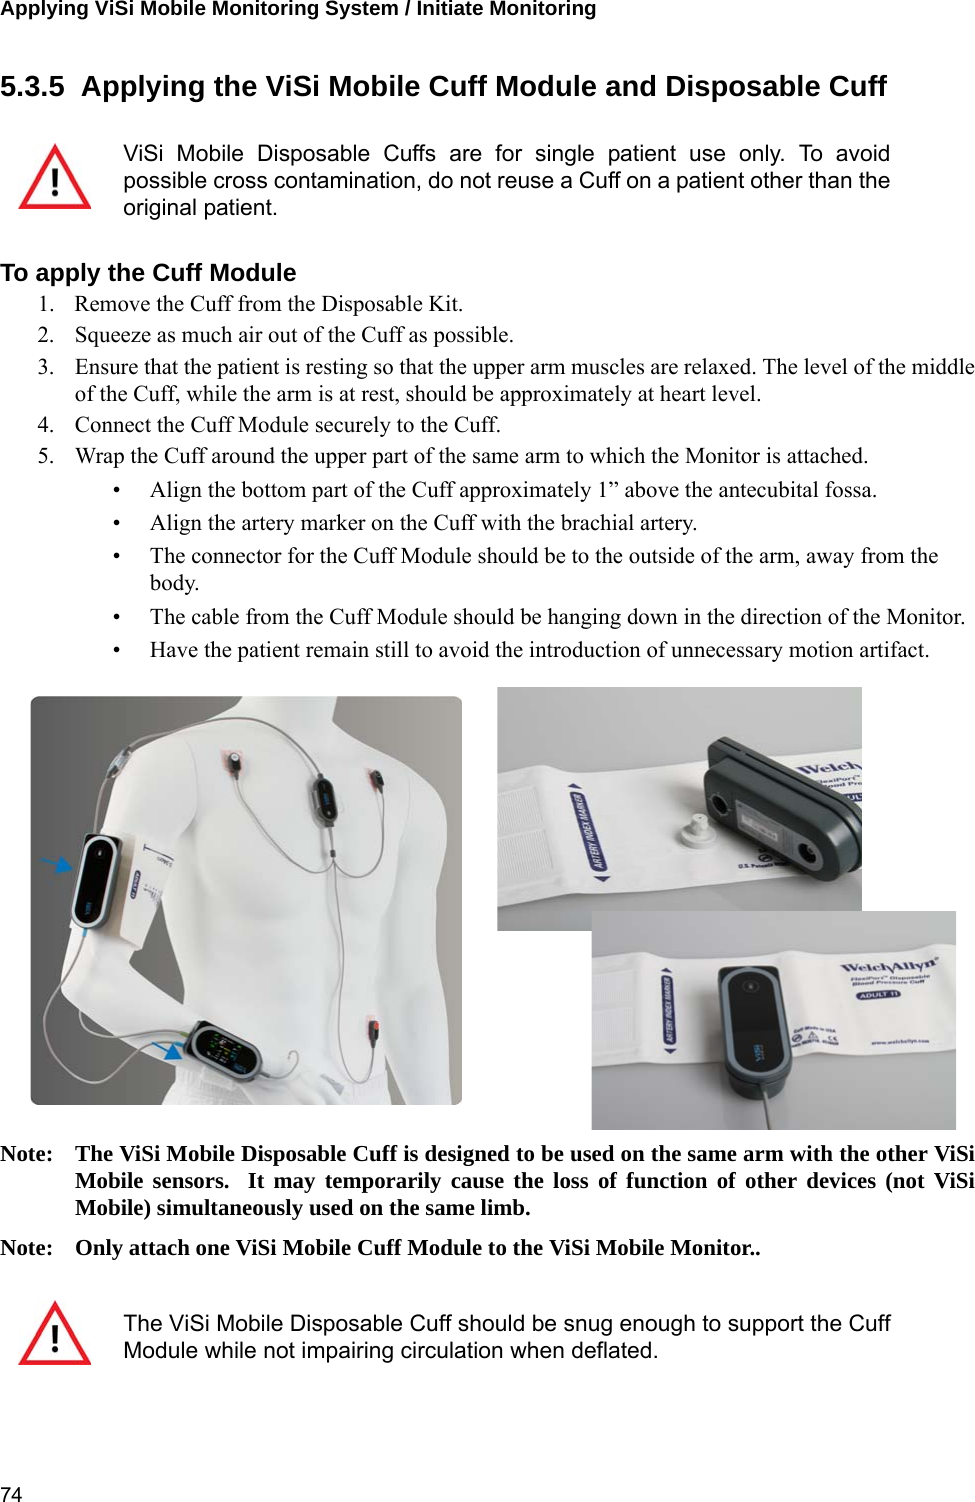 Applying ViSi Mobile Monitoring System / Initiate Monitoring 745.3.5  Applying the ViSi Mobile Cuff Module and Disposable CuffTo apply the Cuff Module1. Remove the Cuff from the Disposable Kit. 2. Squeeze as much air out of the Cuff as possible.3. Ensure that the patient is resting so that the upper arm muscles are relaxed. The level of the middleof the Cuff, while the arm is at rest, should be approximately at heart level.4. Connect the Cuff Module securely to the Cuff.5. Wrap the Cuff around the upper part of the same arm to which the Monitor is attached.• Align the bottom part of the Cuff approximately 1” above the antecubital fossa.• Align the artery marker on the Cuff with the brachial artery.• The connector for the Cuff Module should be to the outside of the arm, away from the body.• The cable from the Cuff Module should be hanging down in the direction of the Monitor.• Have the patient remain still to avoid the introduction of unnecessary motion artifact.Note: The ViSi Mobile Disposable Cuff is designed to be used on the same arm with the other ViSiMobile sensors.  It may temporarily cause the loss of function of other devices (not ViSiMobile) simultaneously used on the same limb.Note: Only attach one ViSi Mobile Cuff Module to the ViSi Mobile Monitor..ViSi Mobile Disposable Cuffs are for single patient use only. To avoidpossible cross contamination, do not reuse a Cuff on a patient other than theoriginal patient.The ViSi Mobile Disposable Cuff should be snug enough to support the CuffModule while not impairing circulation when deflated.